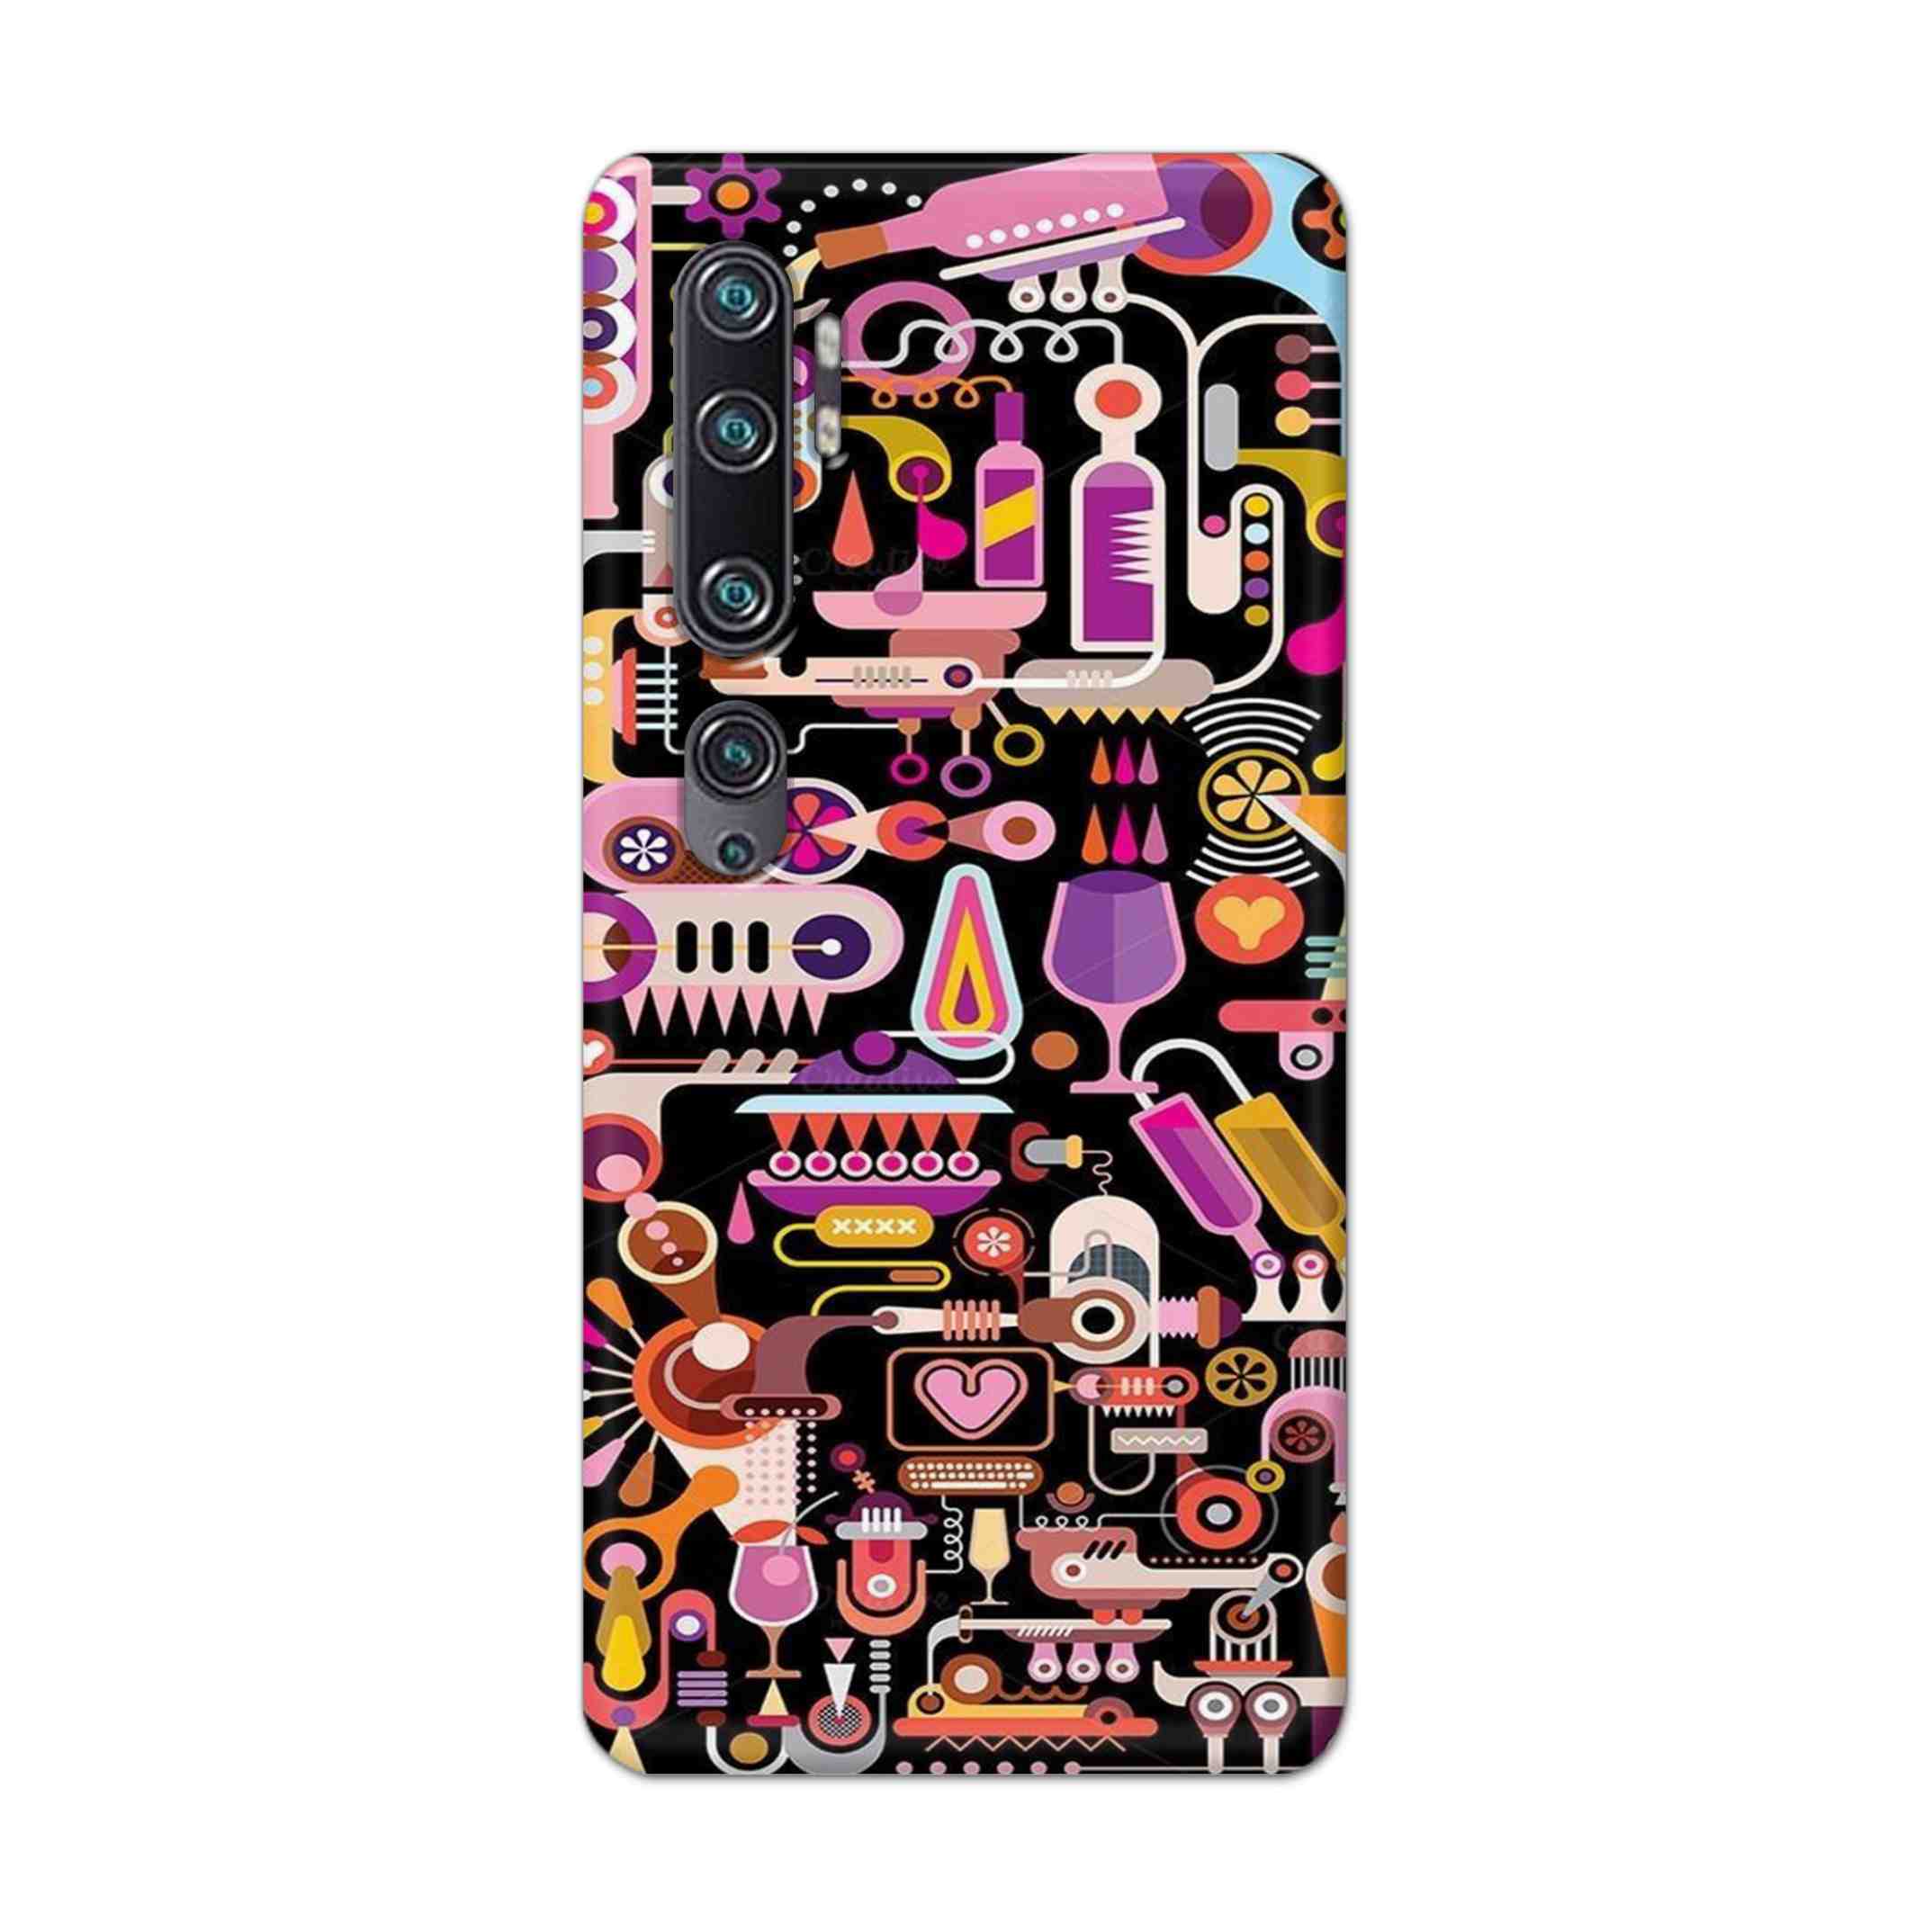 Buy Lab Art Hard Back Mobile Phone Case Cover For Xiaomi Mi Note 10 Pro Online